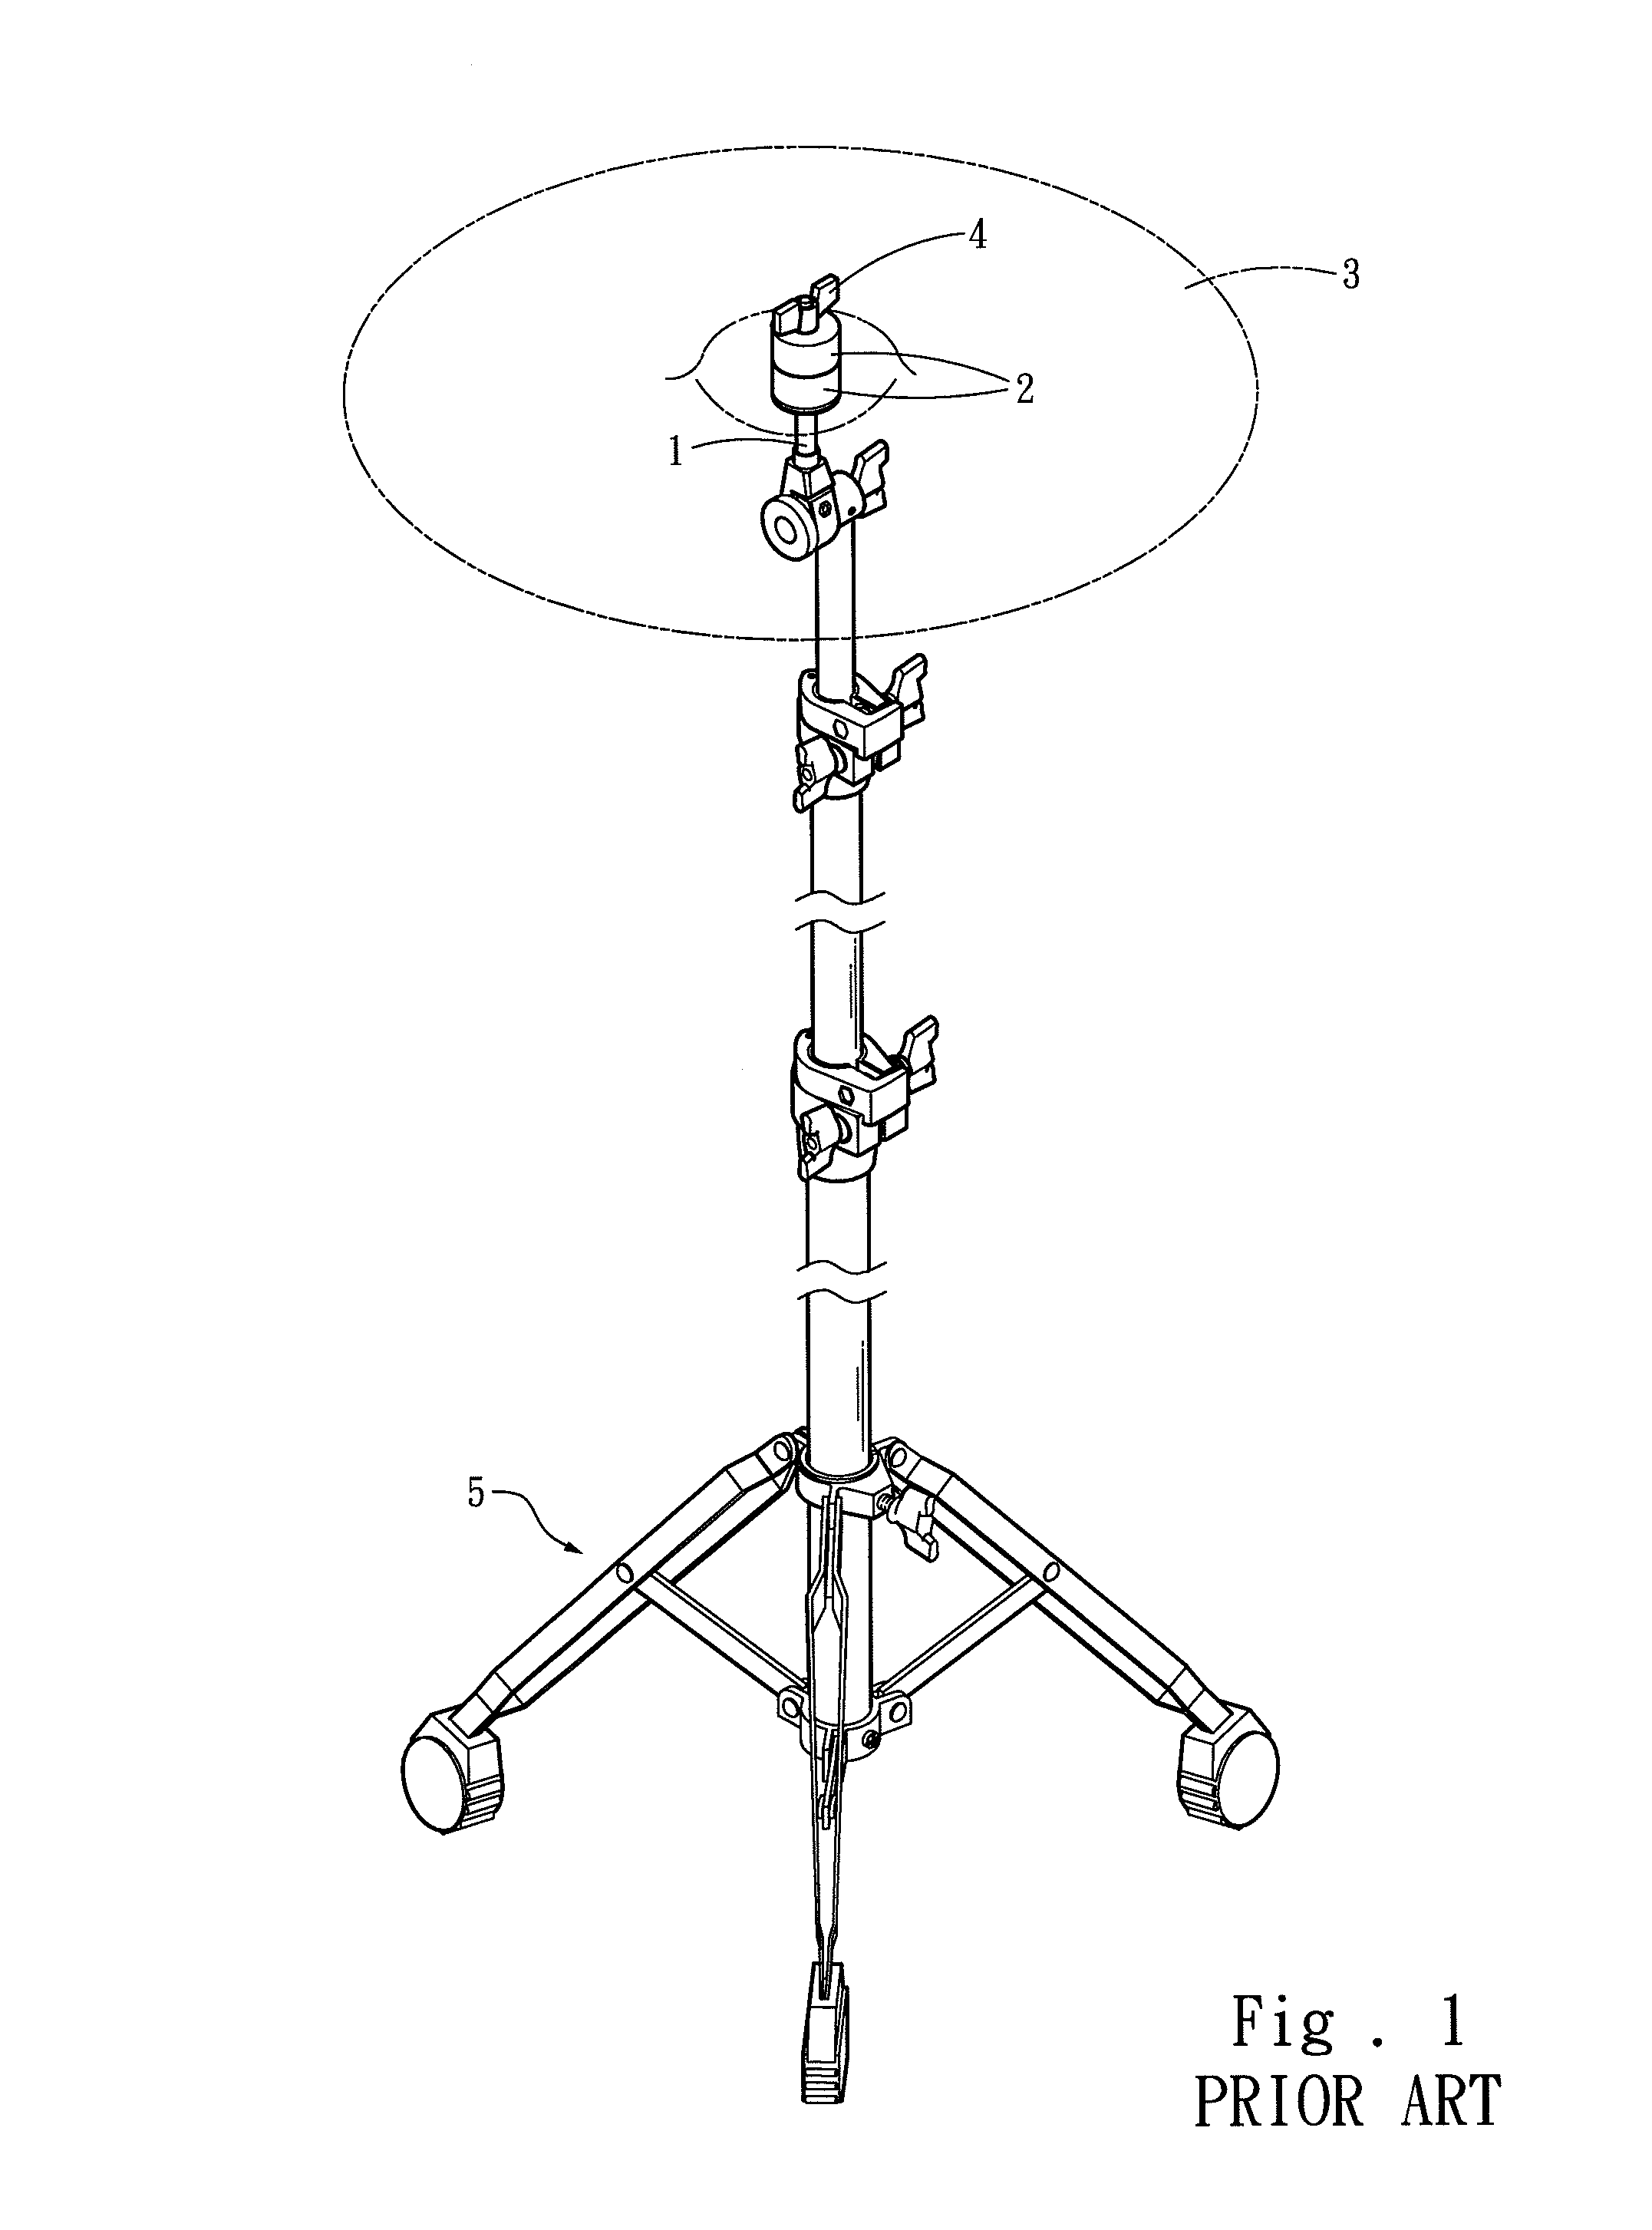 Cymbal support structure